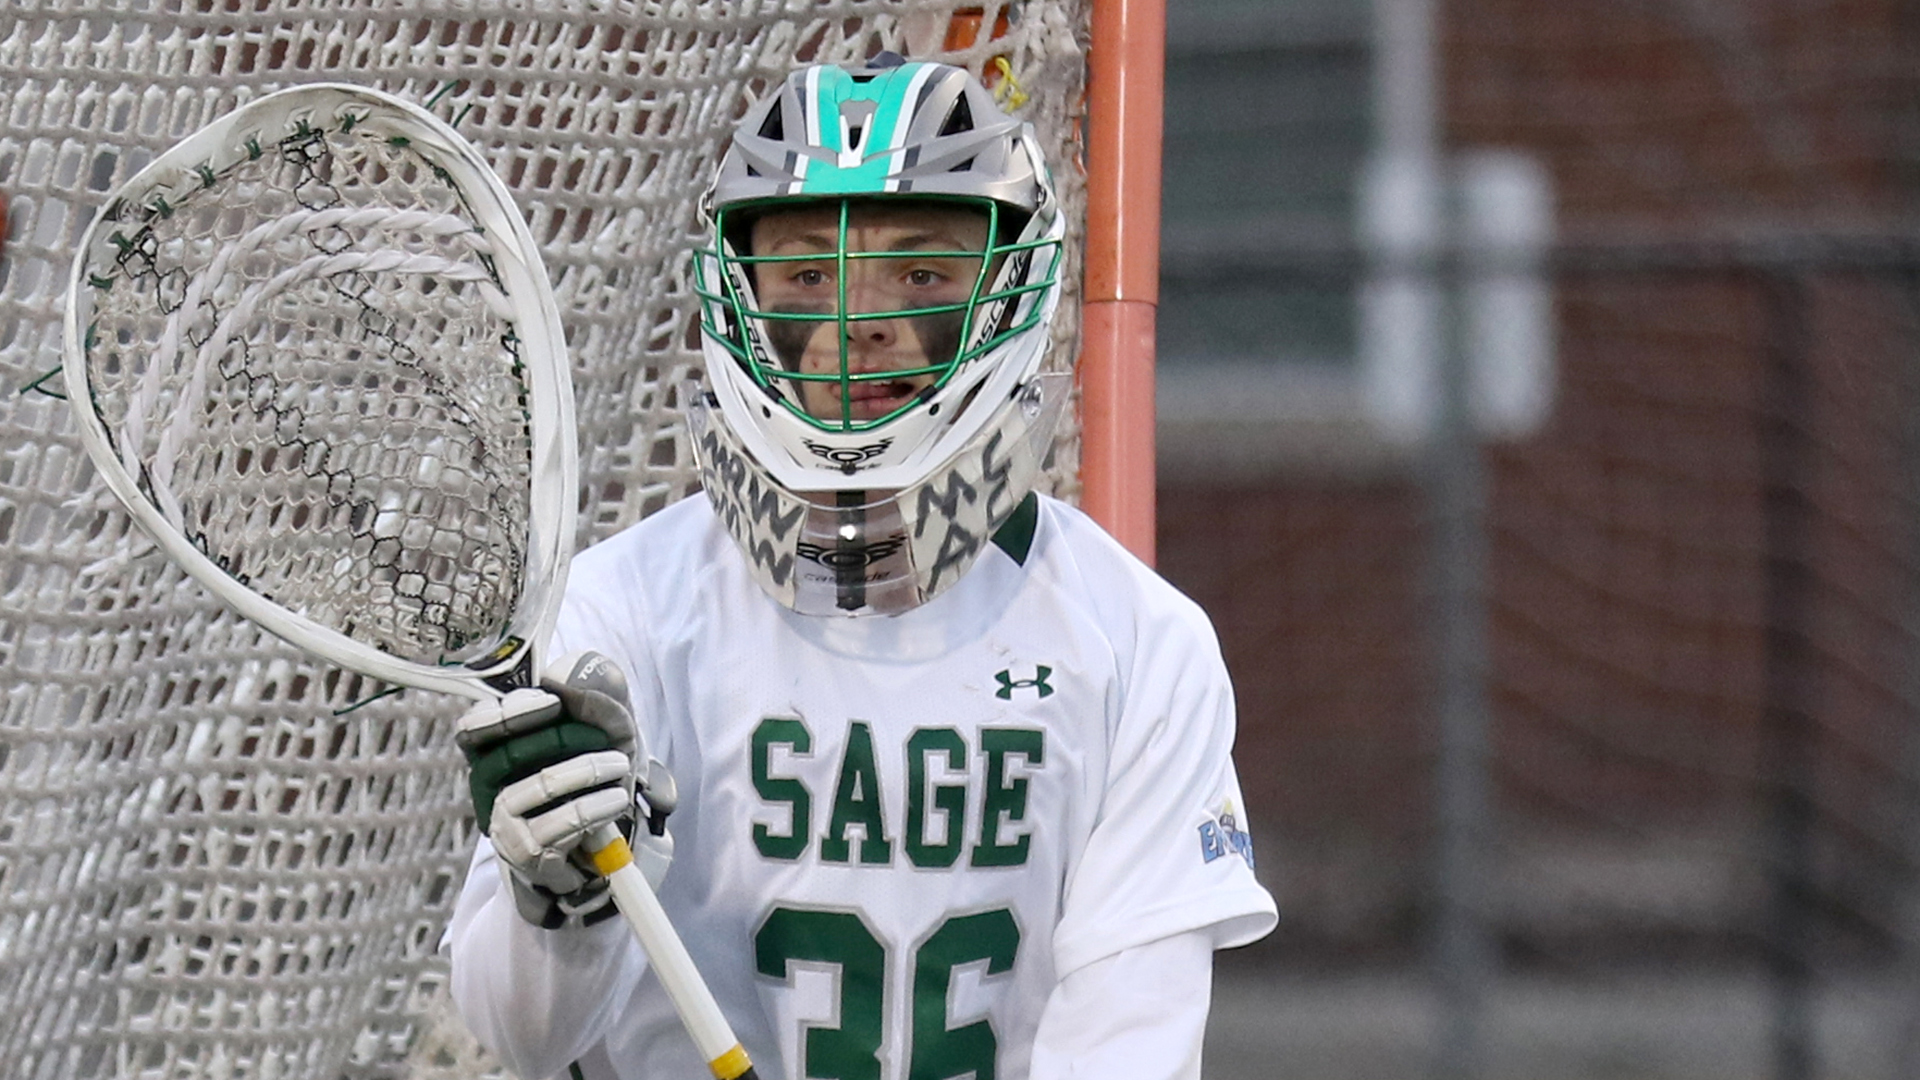 Collora named Empire 8 Goalie of the Week